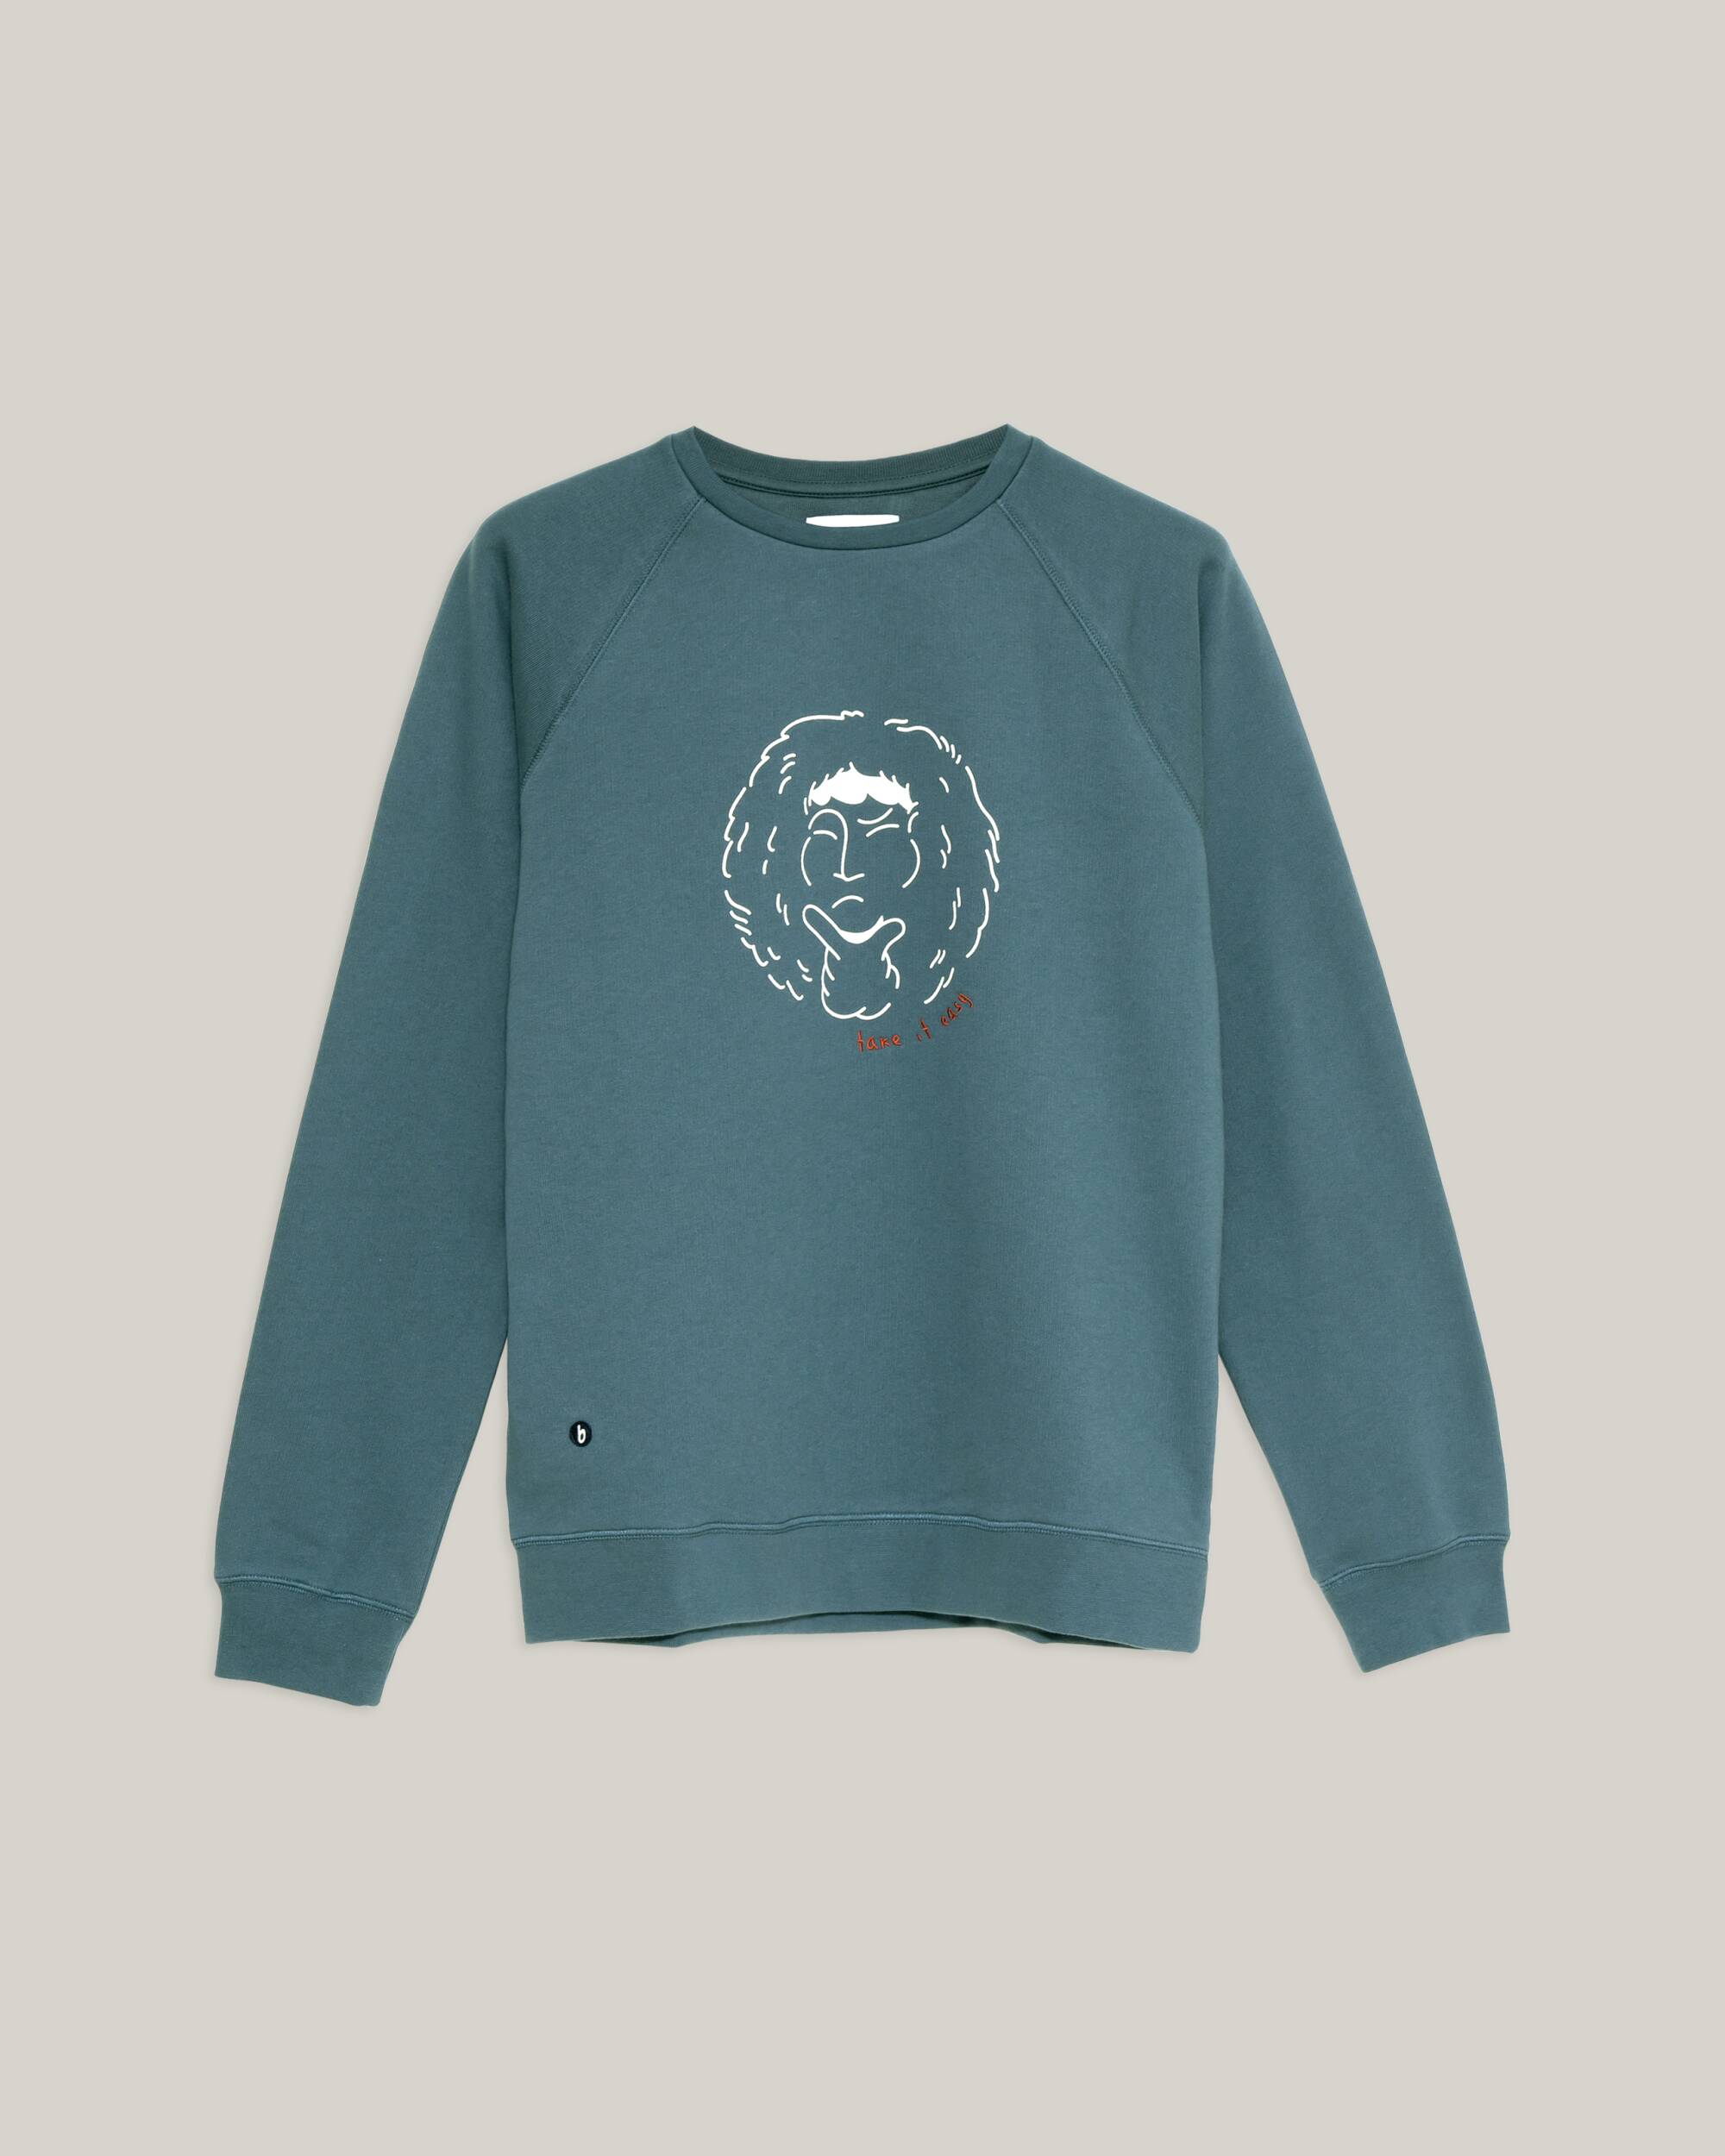 Sweatshirt "Walker" in petrol blue with great print and embroidery made of 100% organic cotton from Brava Fabrics